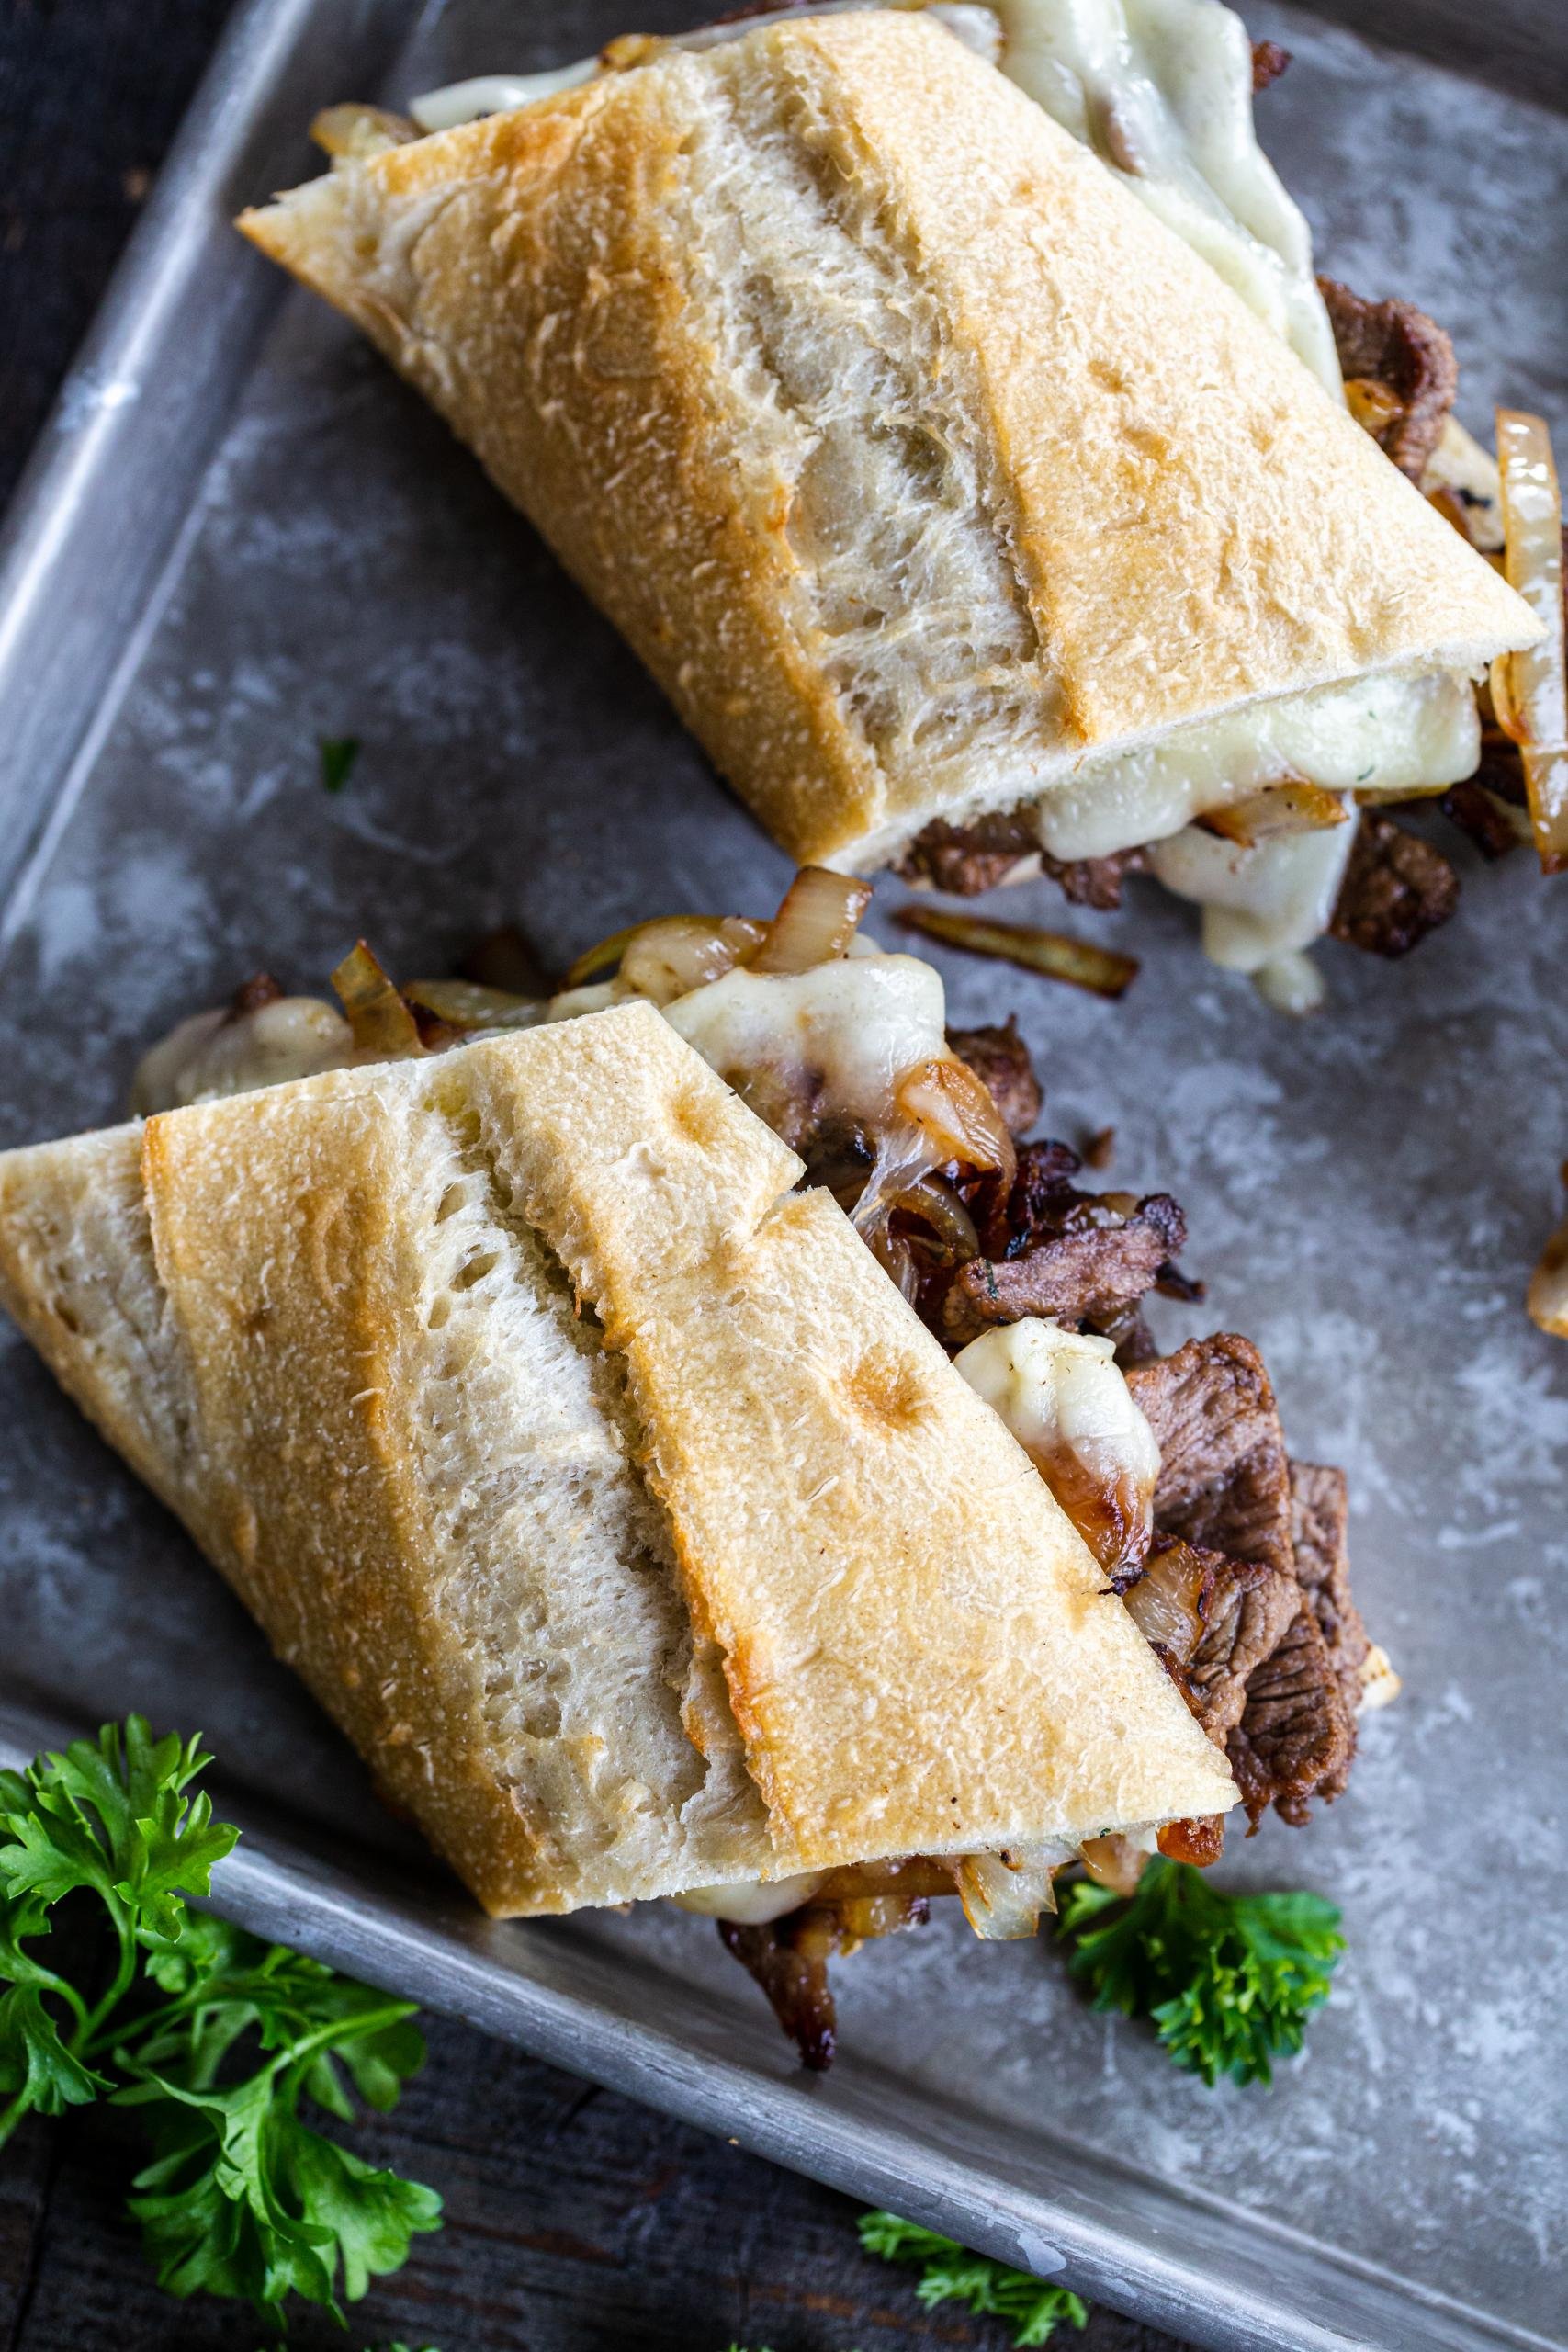 Easy Philly Cheesesteak Recipe (The Ultimate Guide) - Momsdish